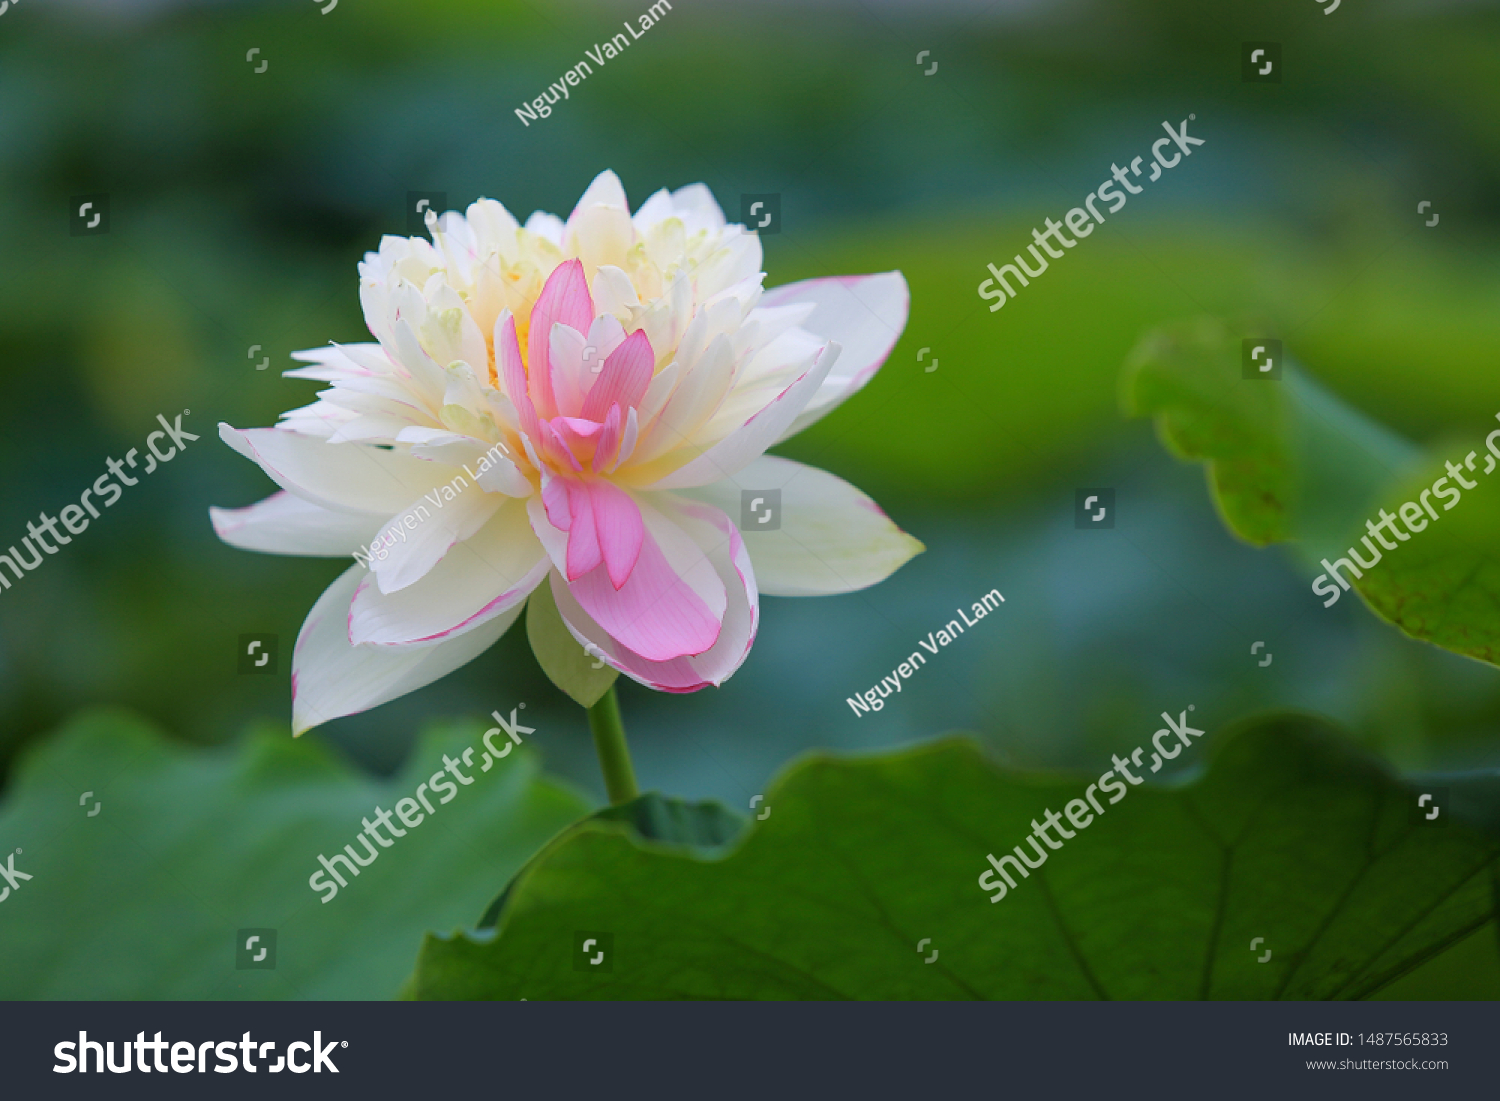 White lotus with pink border taken at the beautiful ocean of tranquil tranquility on July 4, 2017
 #1487565833